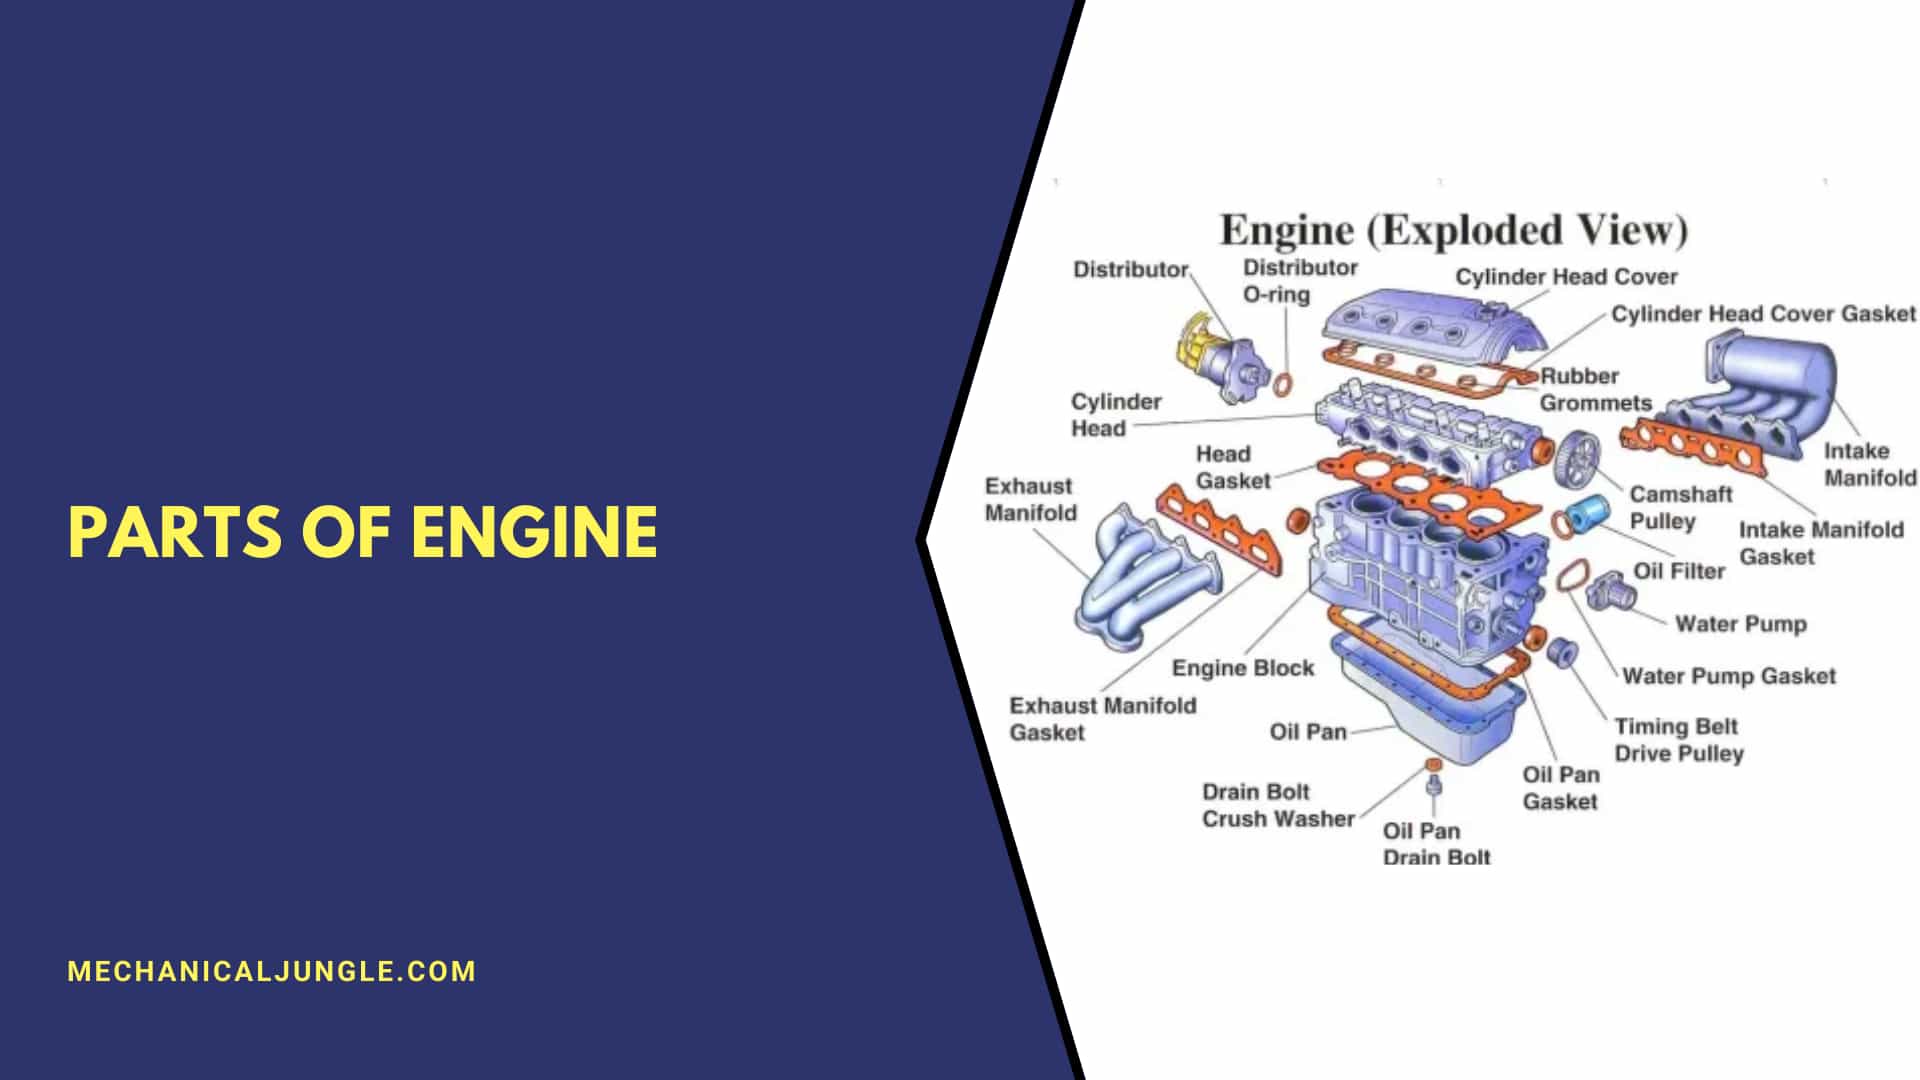 Parts of Engine